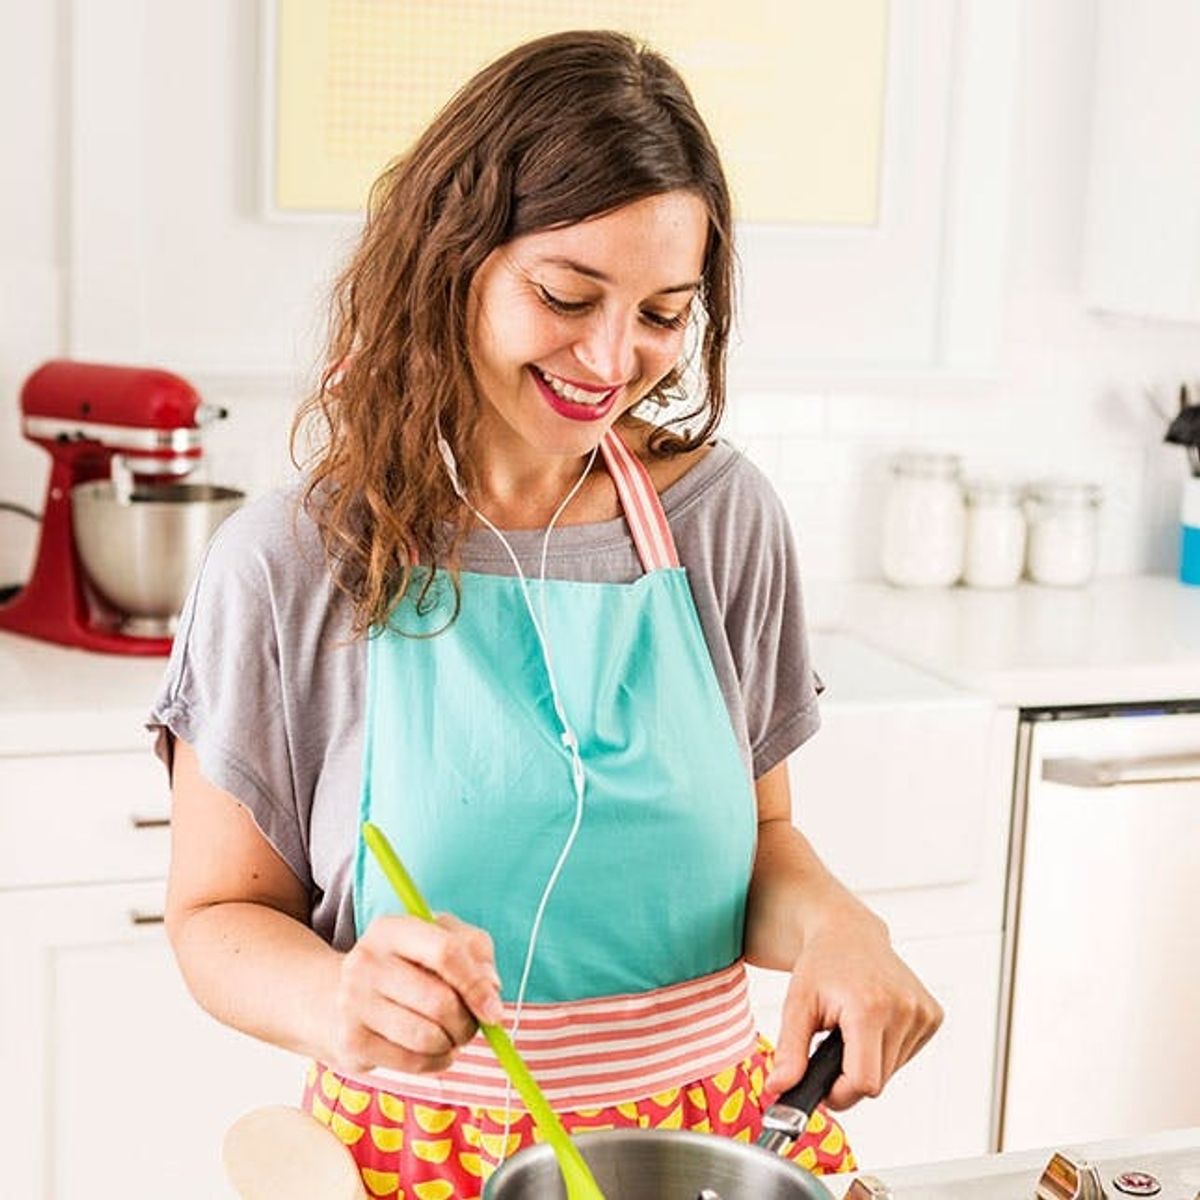 This Apron Has a Secret Pocket for Your Phone